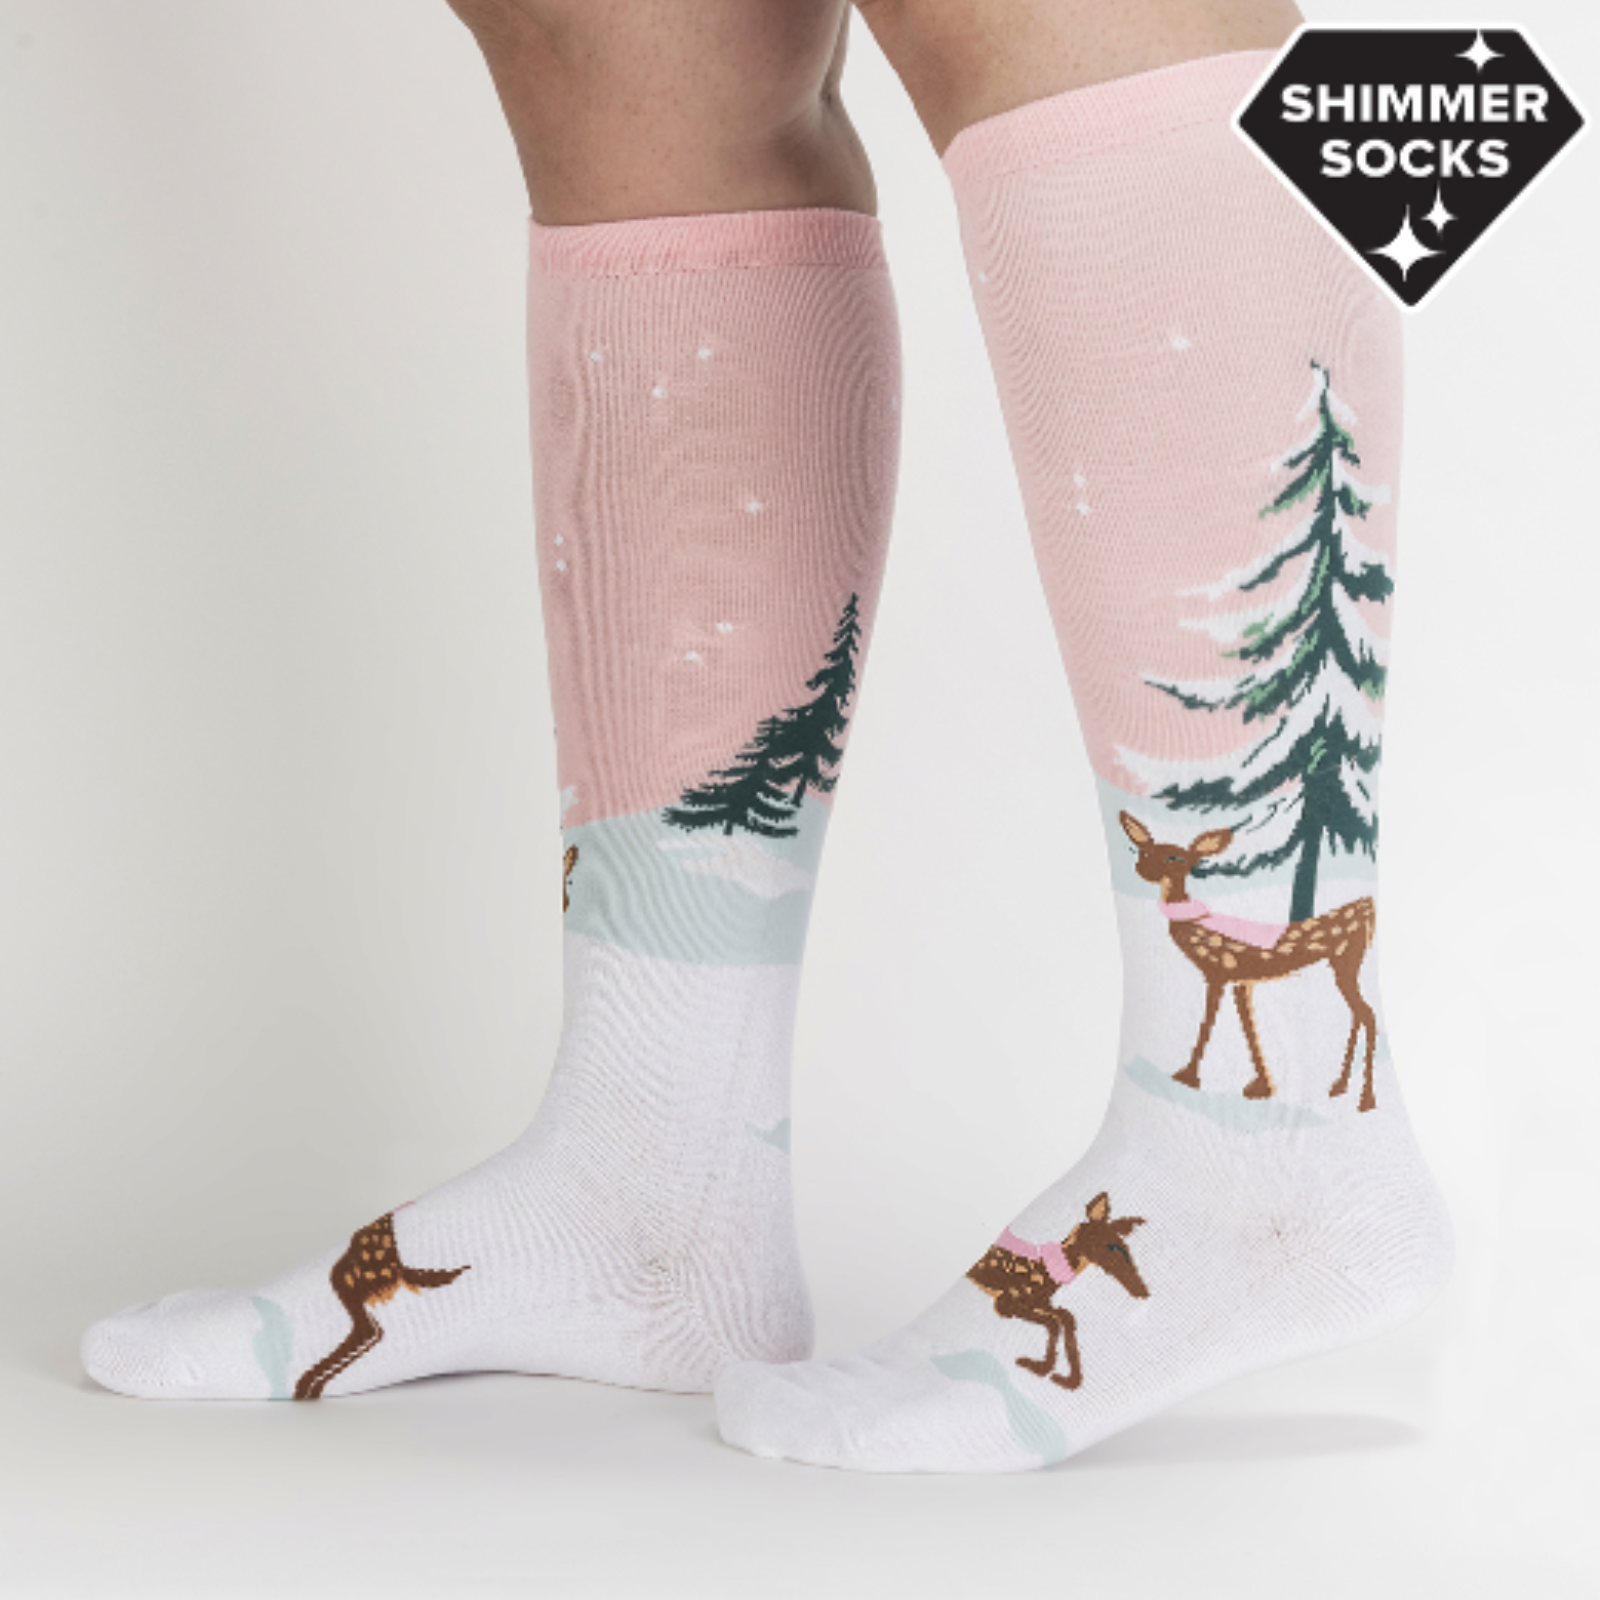 Sock It To Me Doe-nt Forget Your Scarf women's knee high sock featuring pink sock with snow-covered fir tree and deer with pink scarf. Socks worn by model seen from side. 